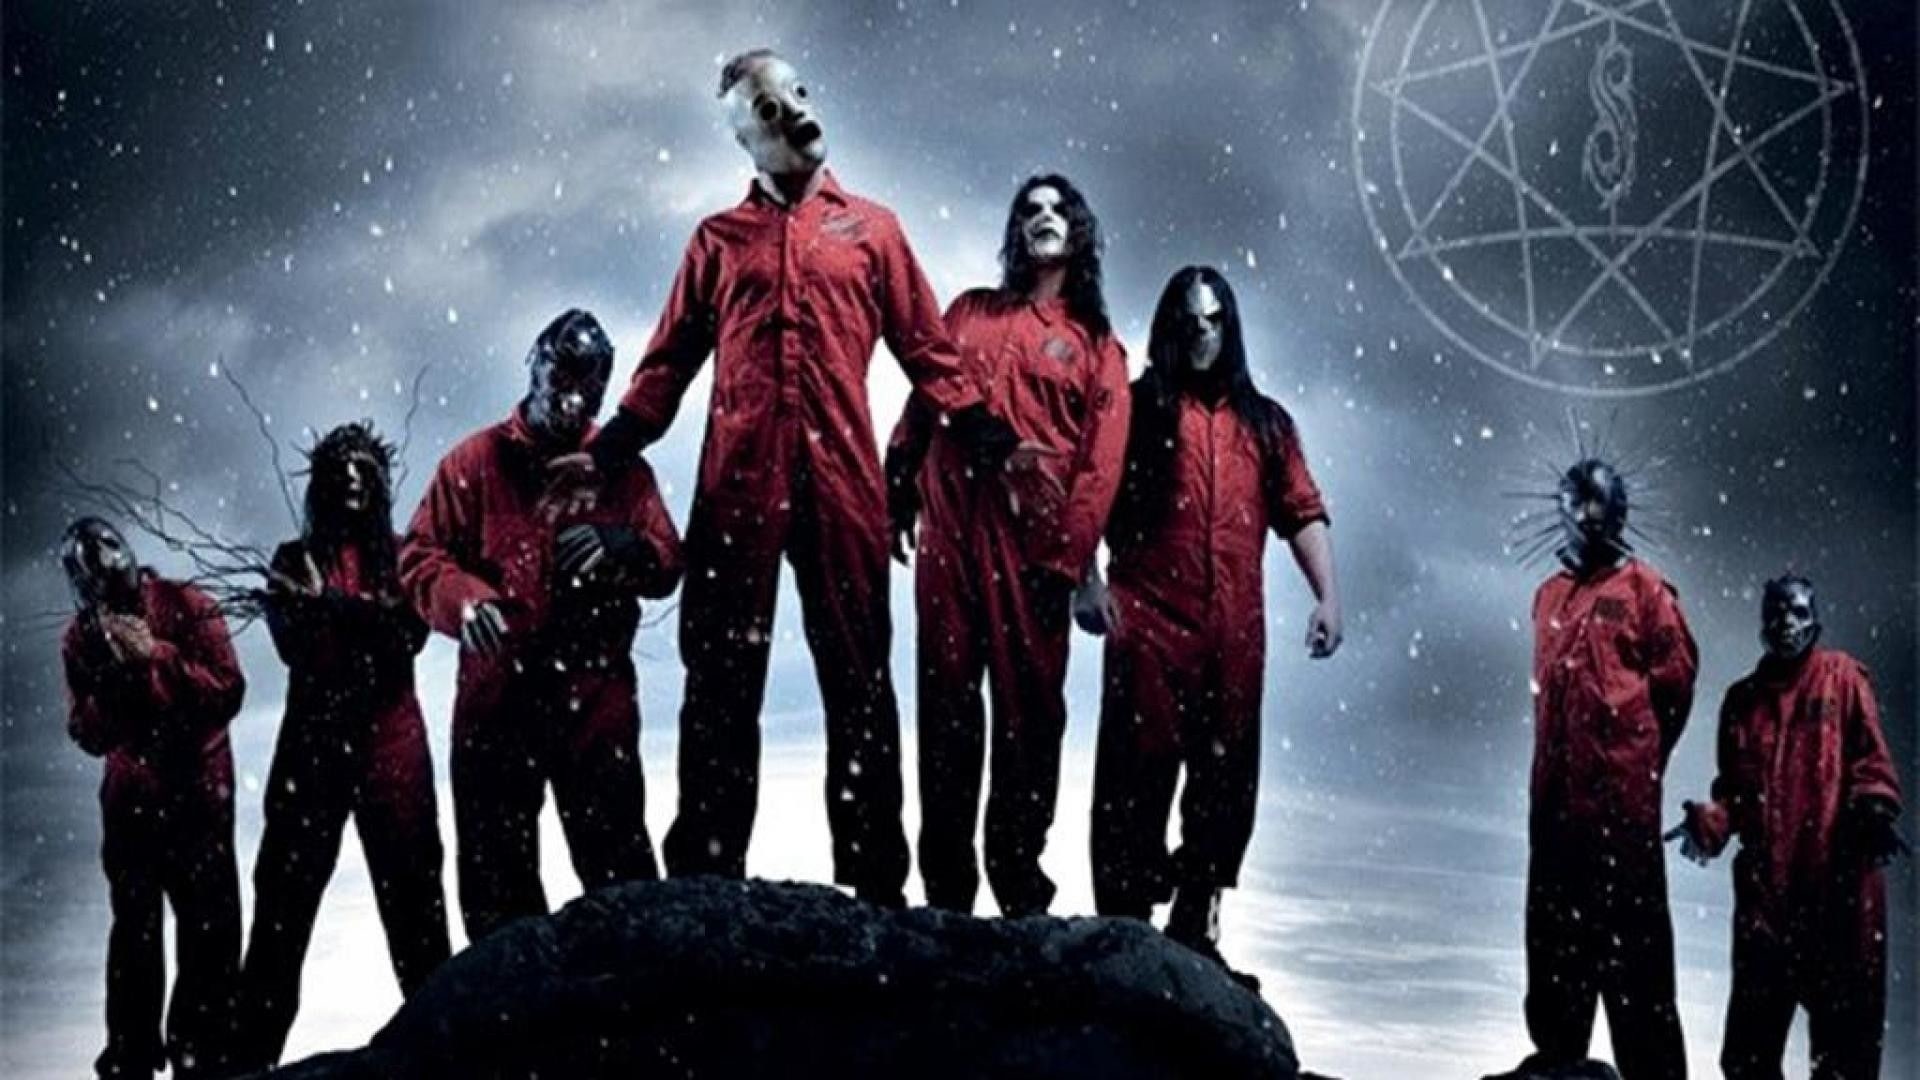 Slipknot HD Wallpapers 1000 Free Slipknot Wallpaper Images For All Devices